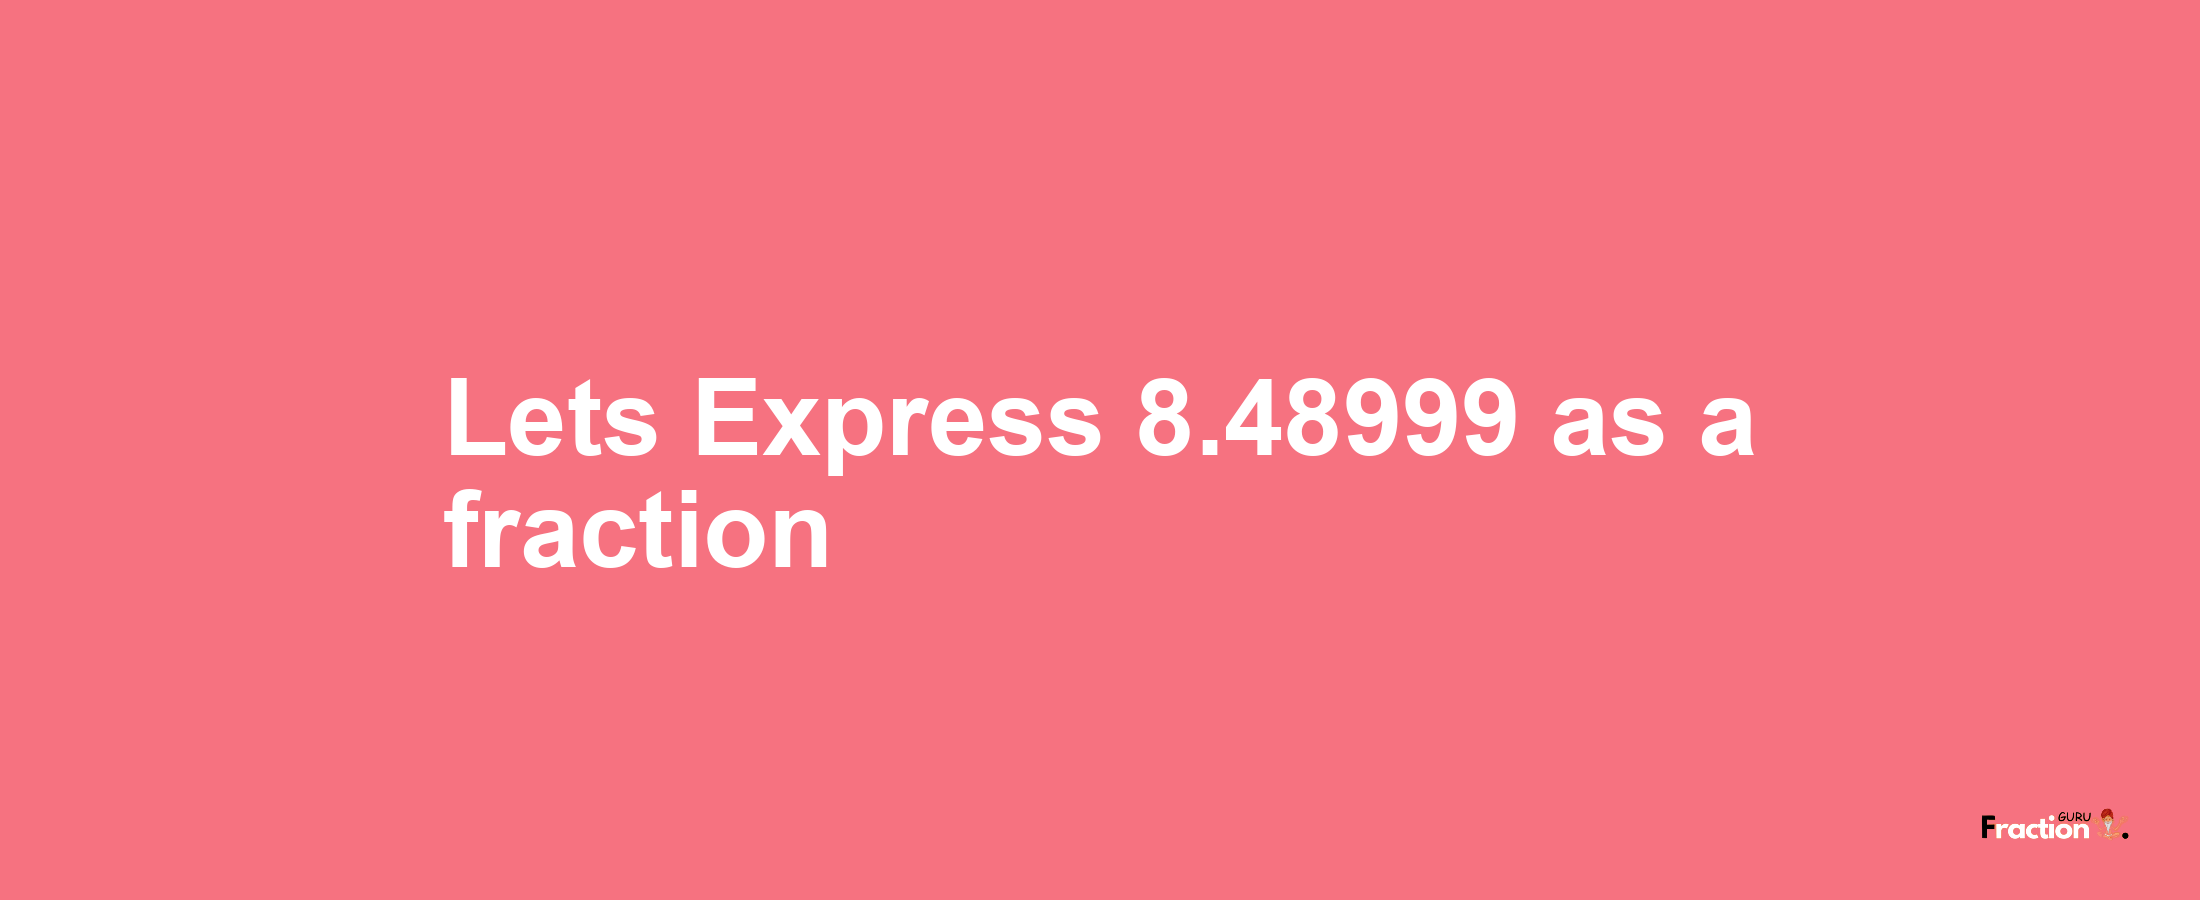 Lets Express 8.48999 as afraction